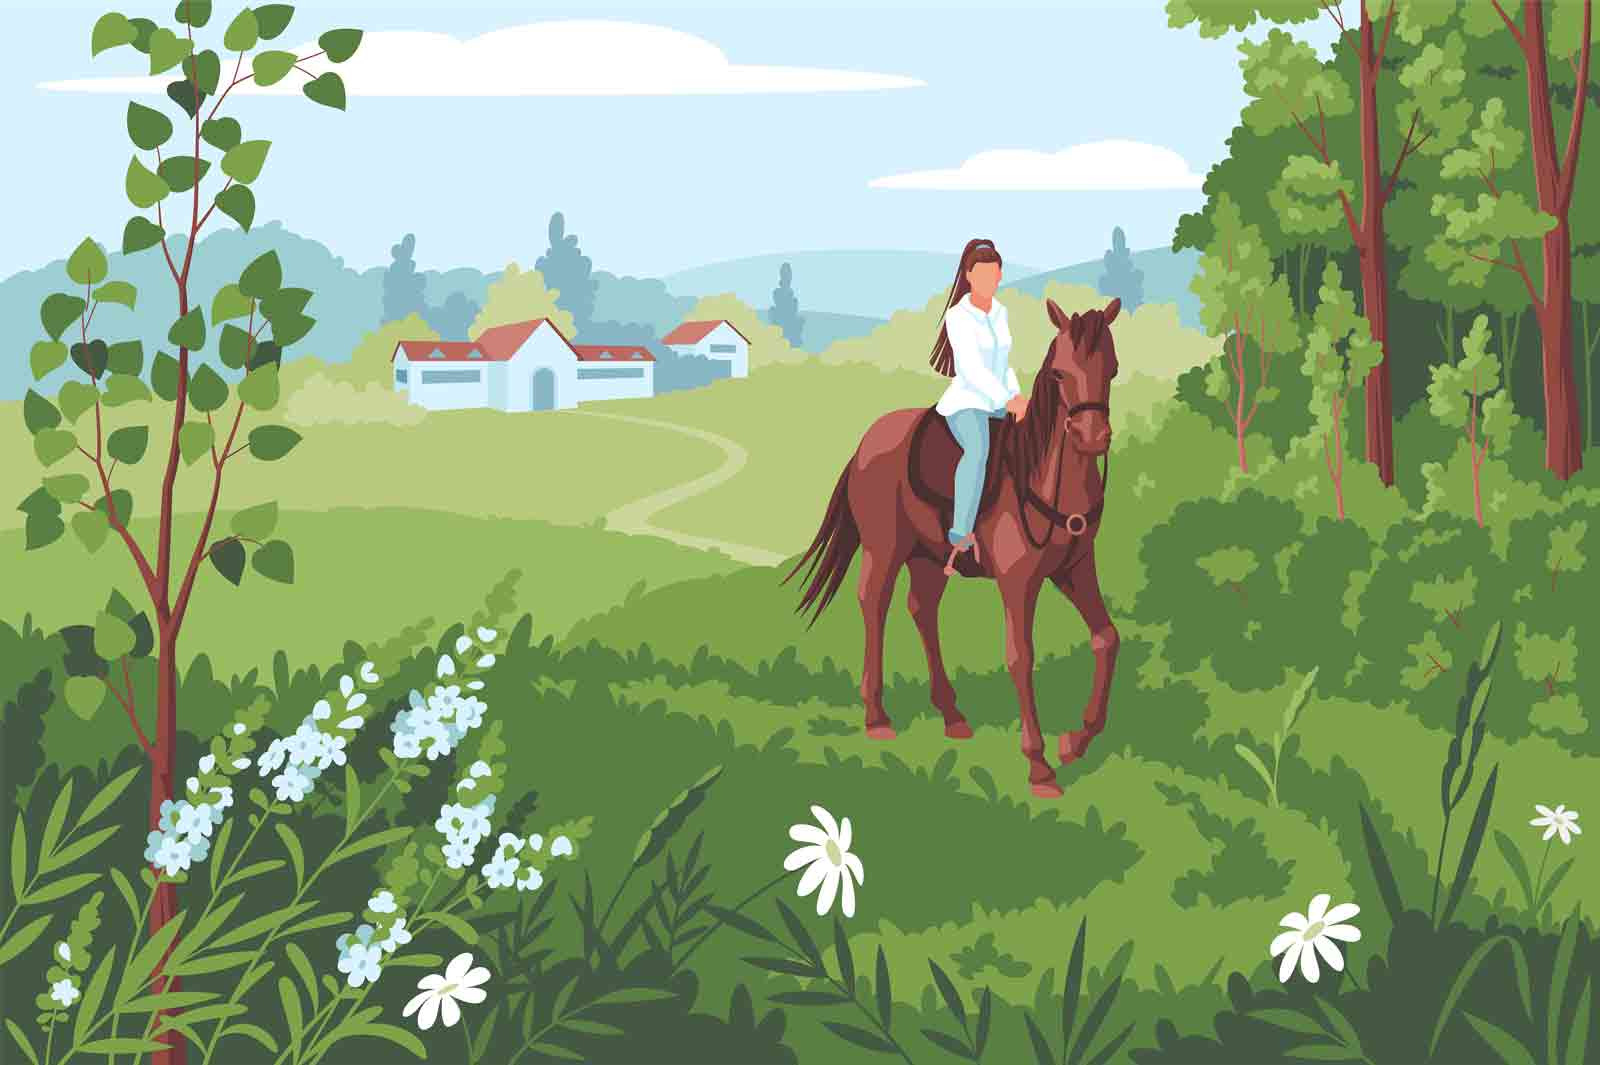 Girl horseback riding bay horse in nature vector illustration. Summer activities and equestrian hobbies at countryside flat concept